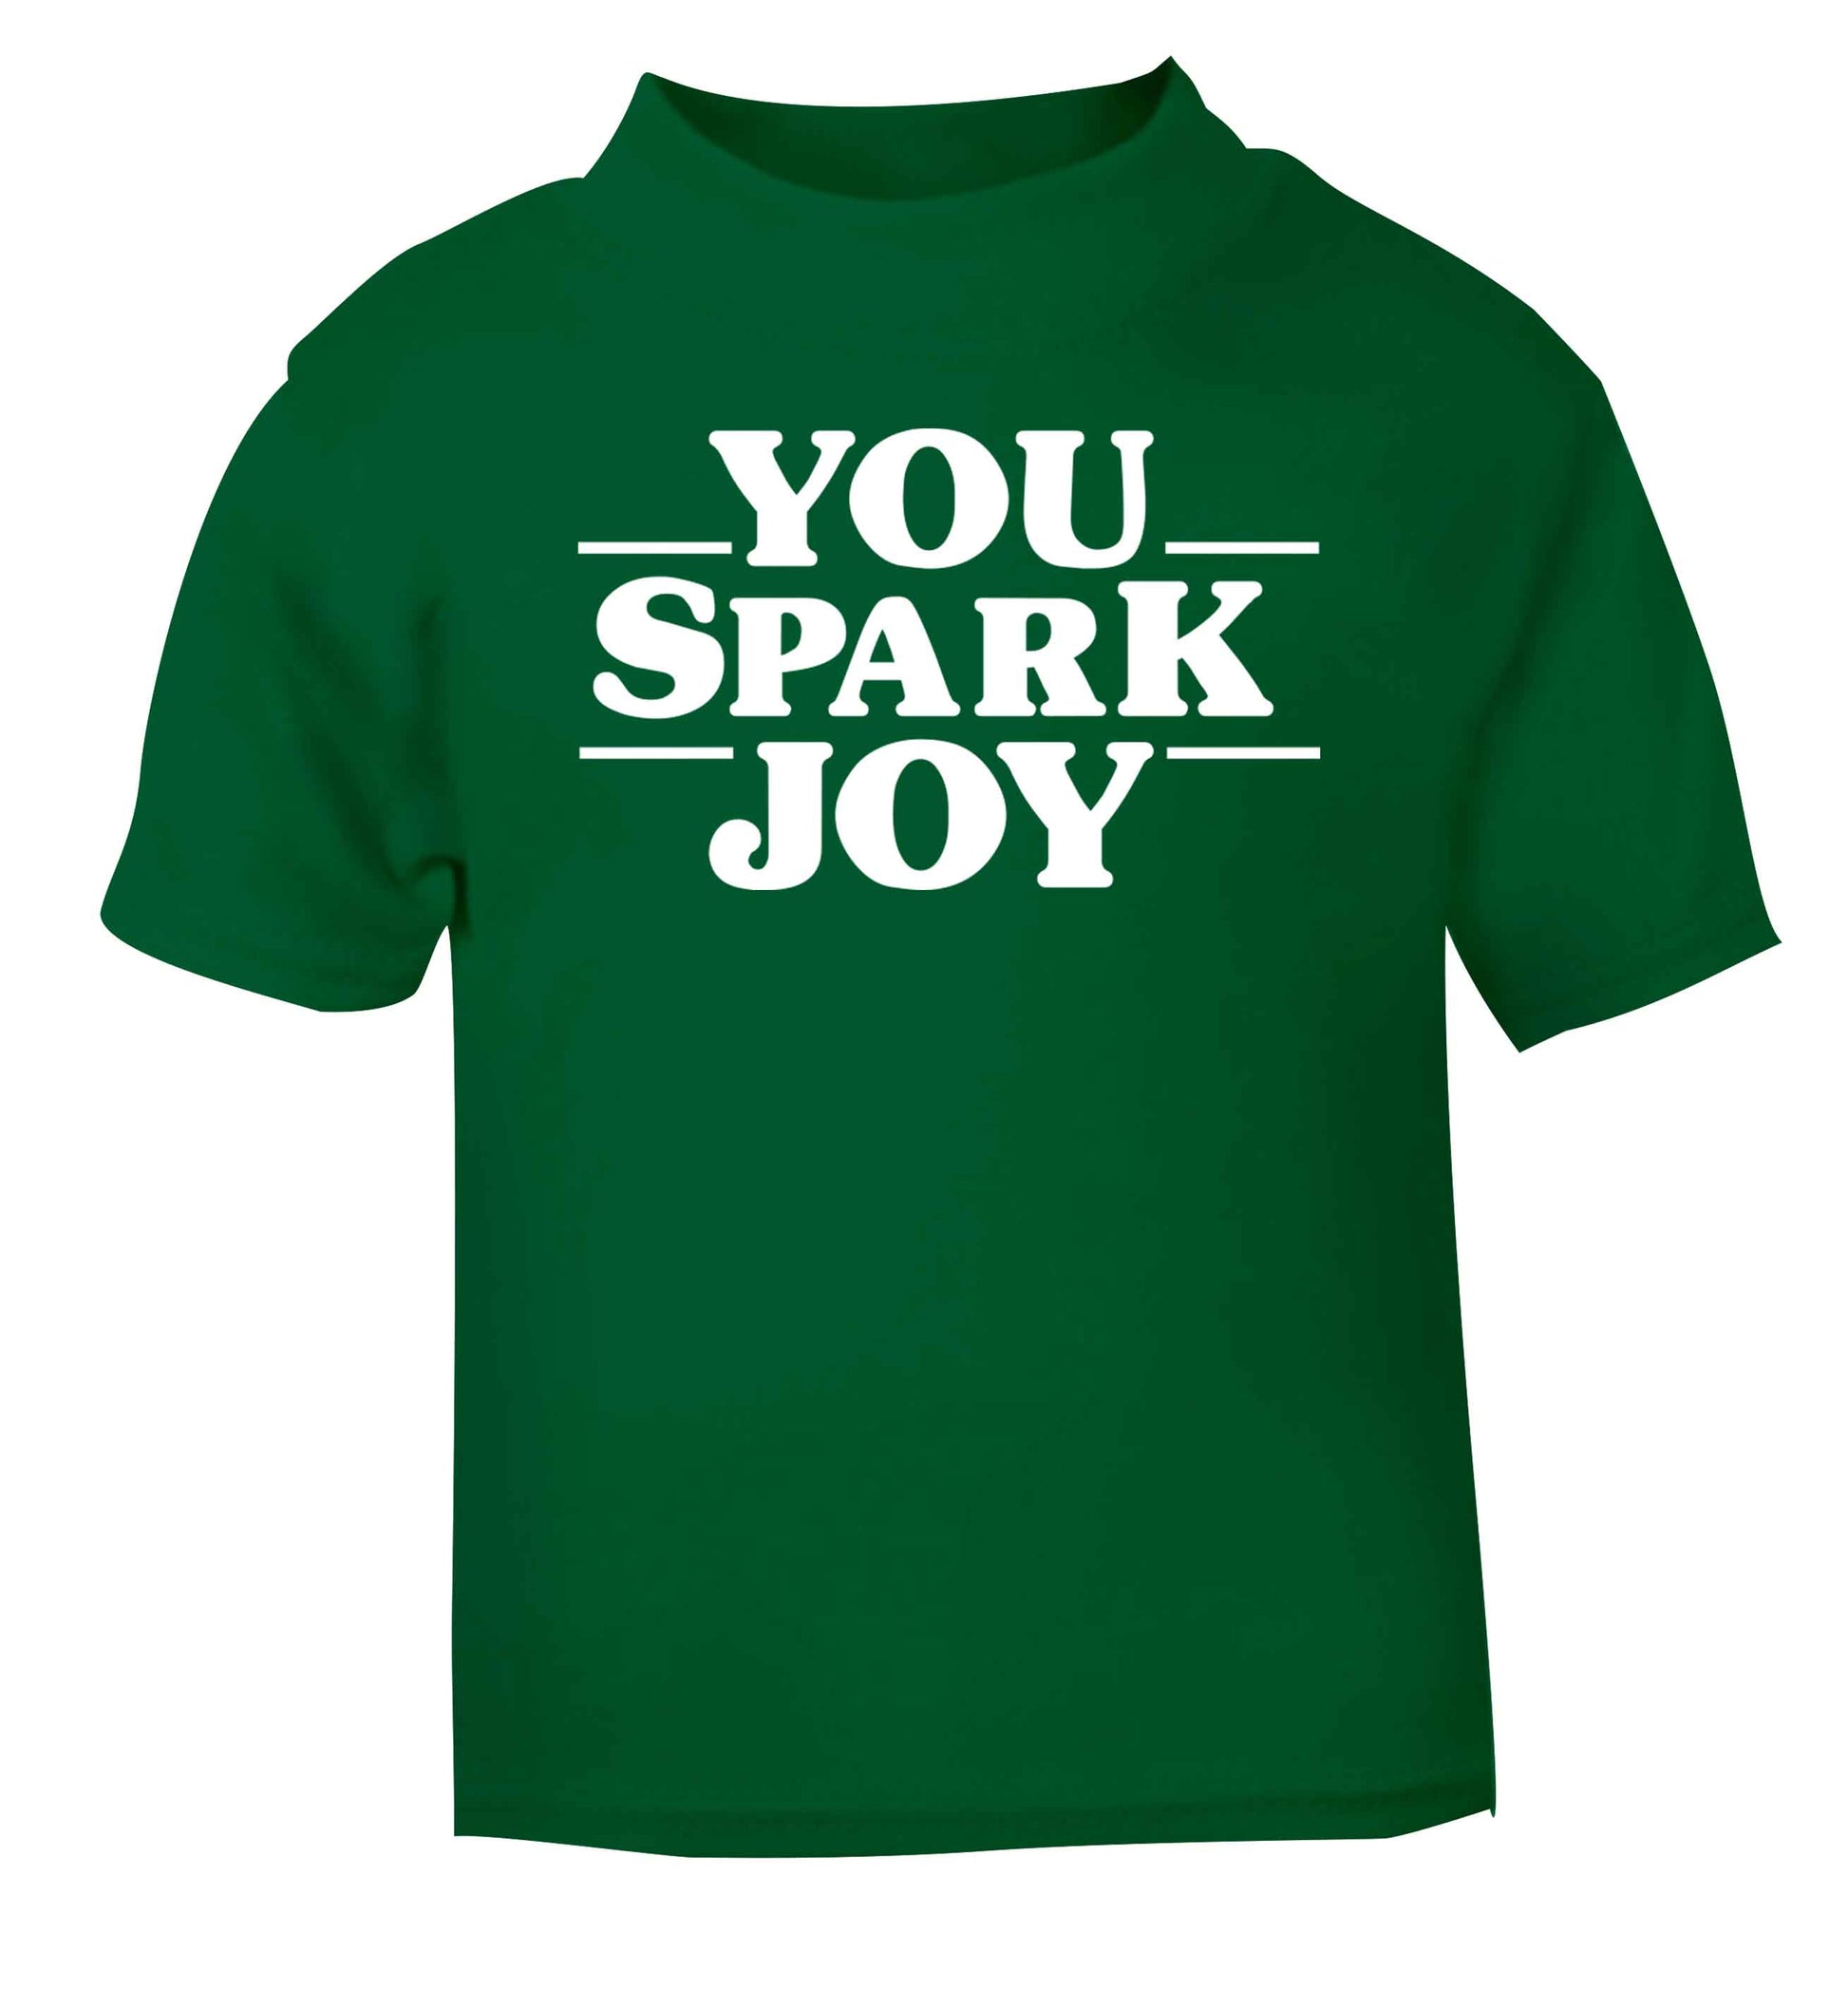 You spark joy green baby toddler Tshirt 2 Years